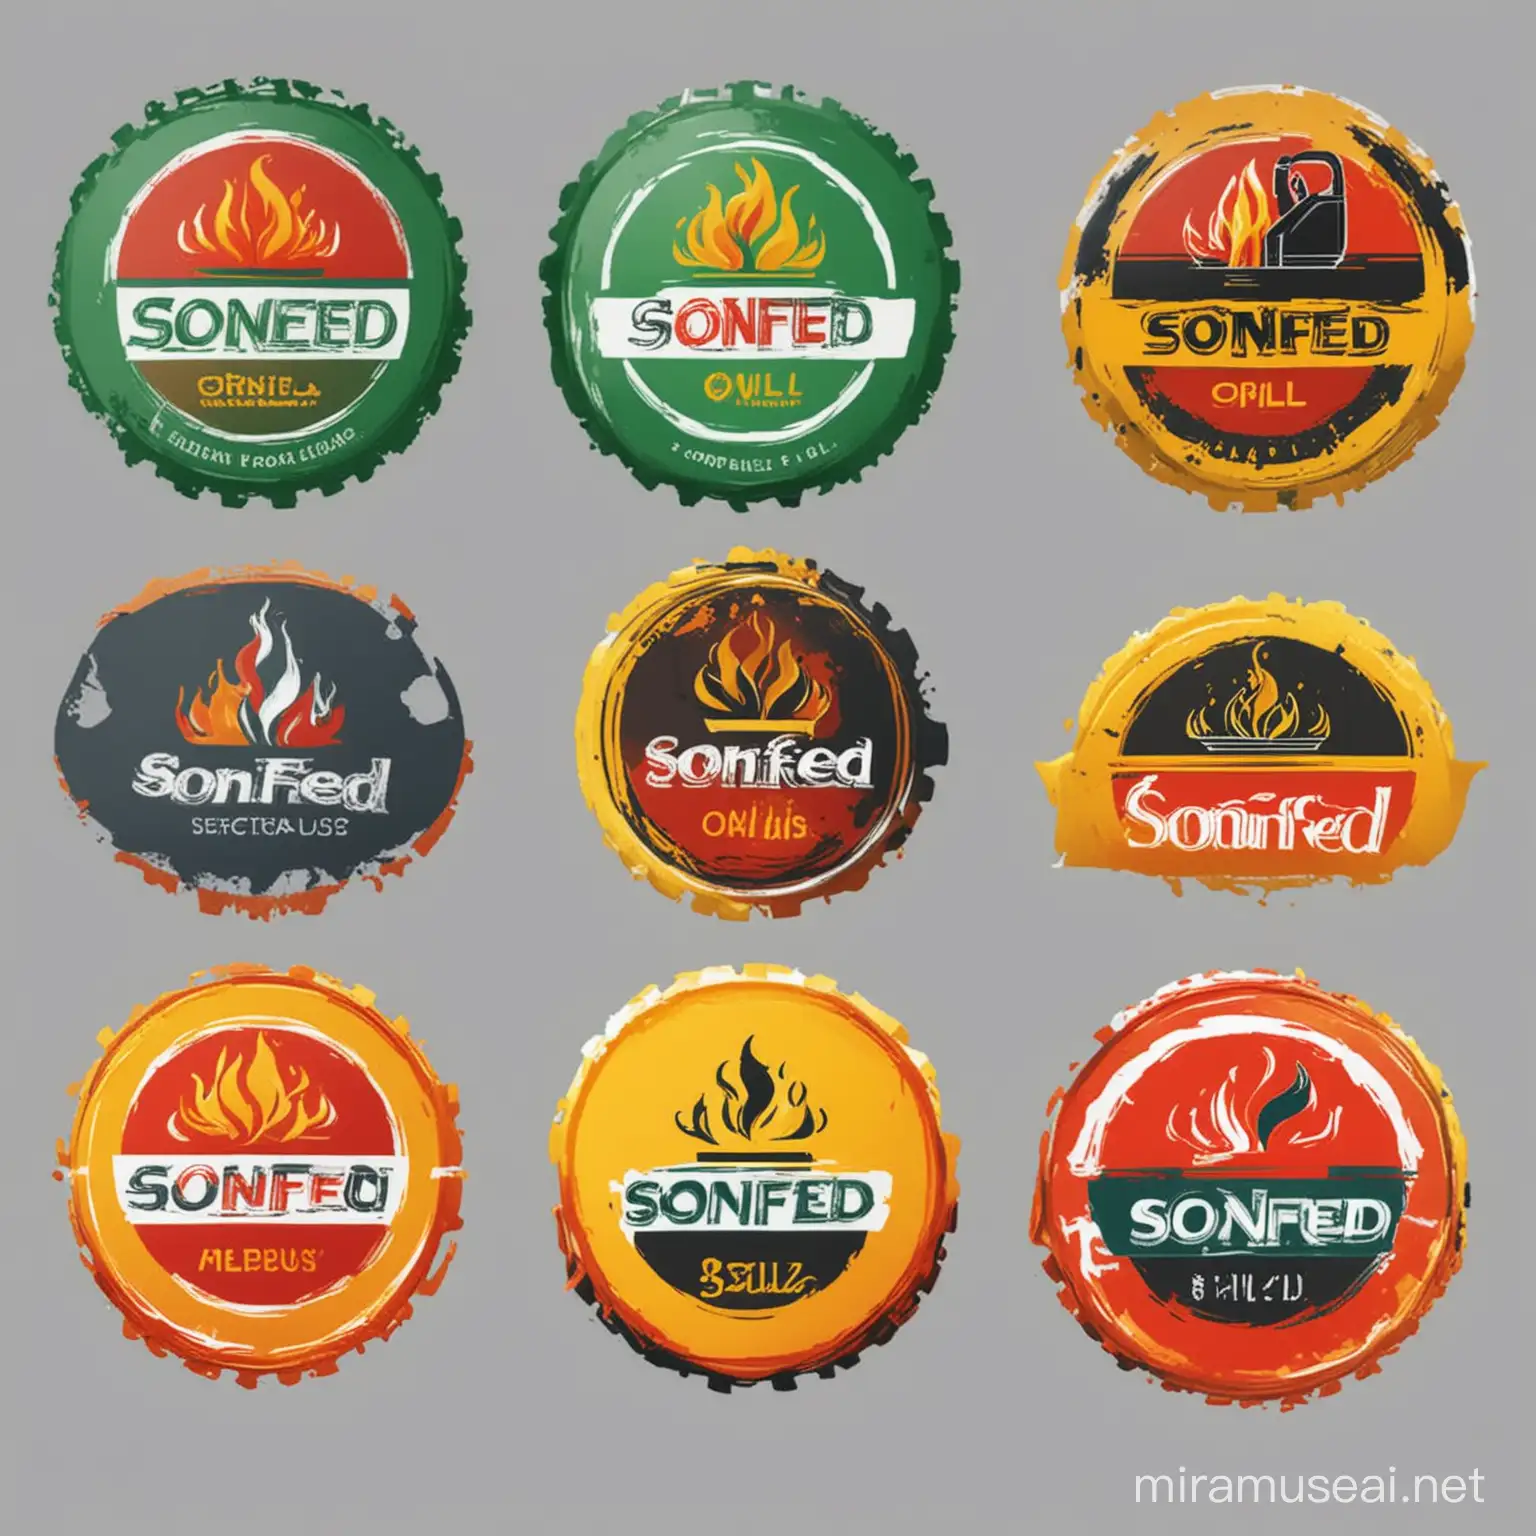 Please can you suggest 5 variants of a brand logo for a company called "Sonfed Oil", which mainly deals with fuels.